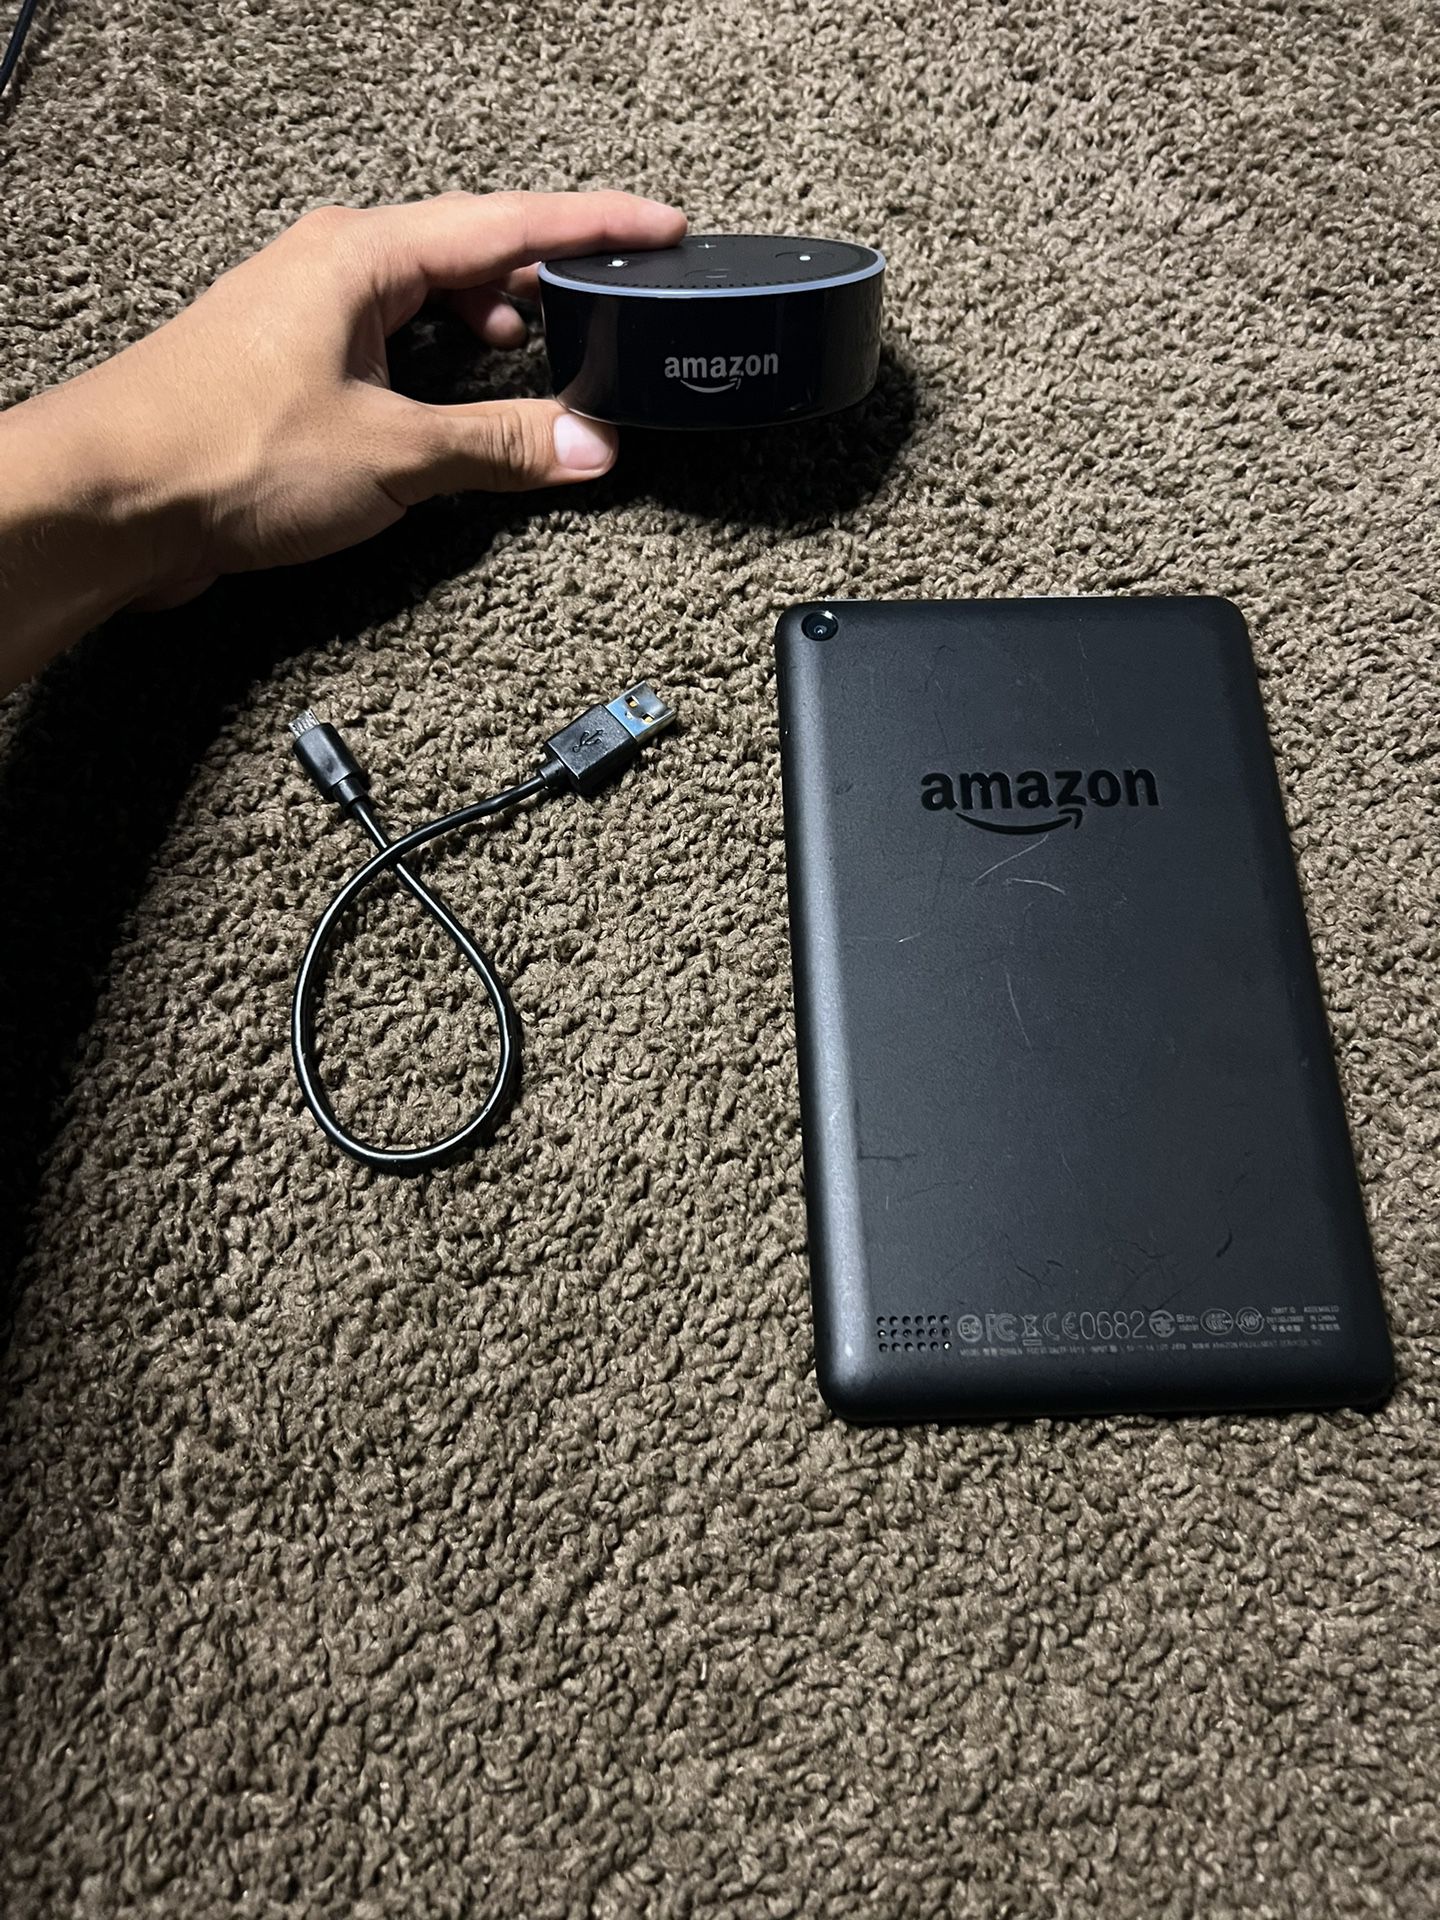 Amazon Tablet Fire 7 And Amazon Alexa With The Charger For Both TESTED 